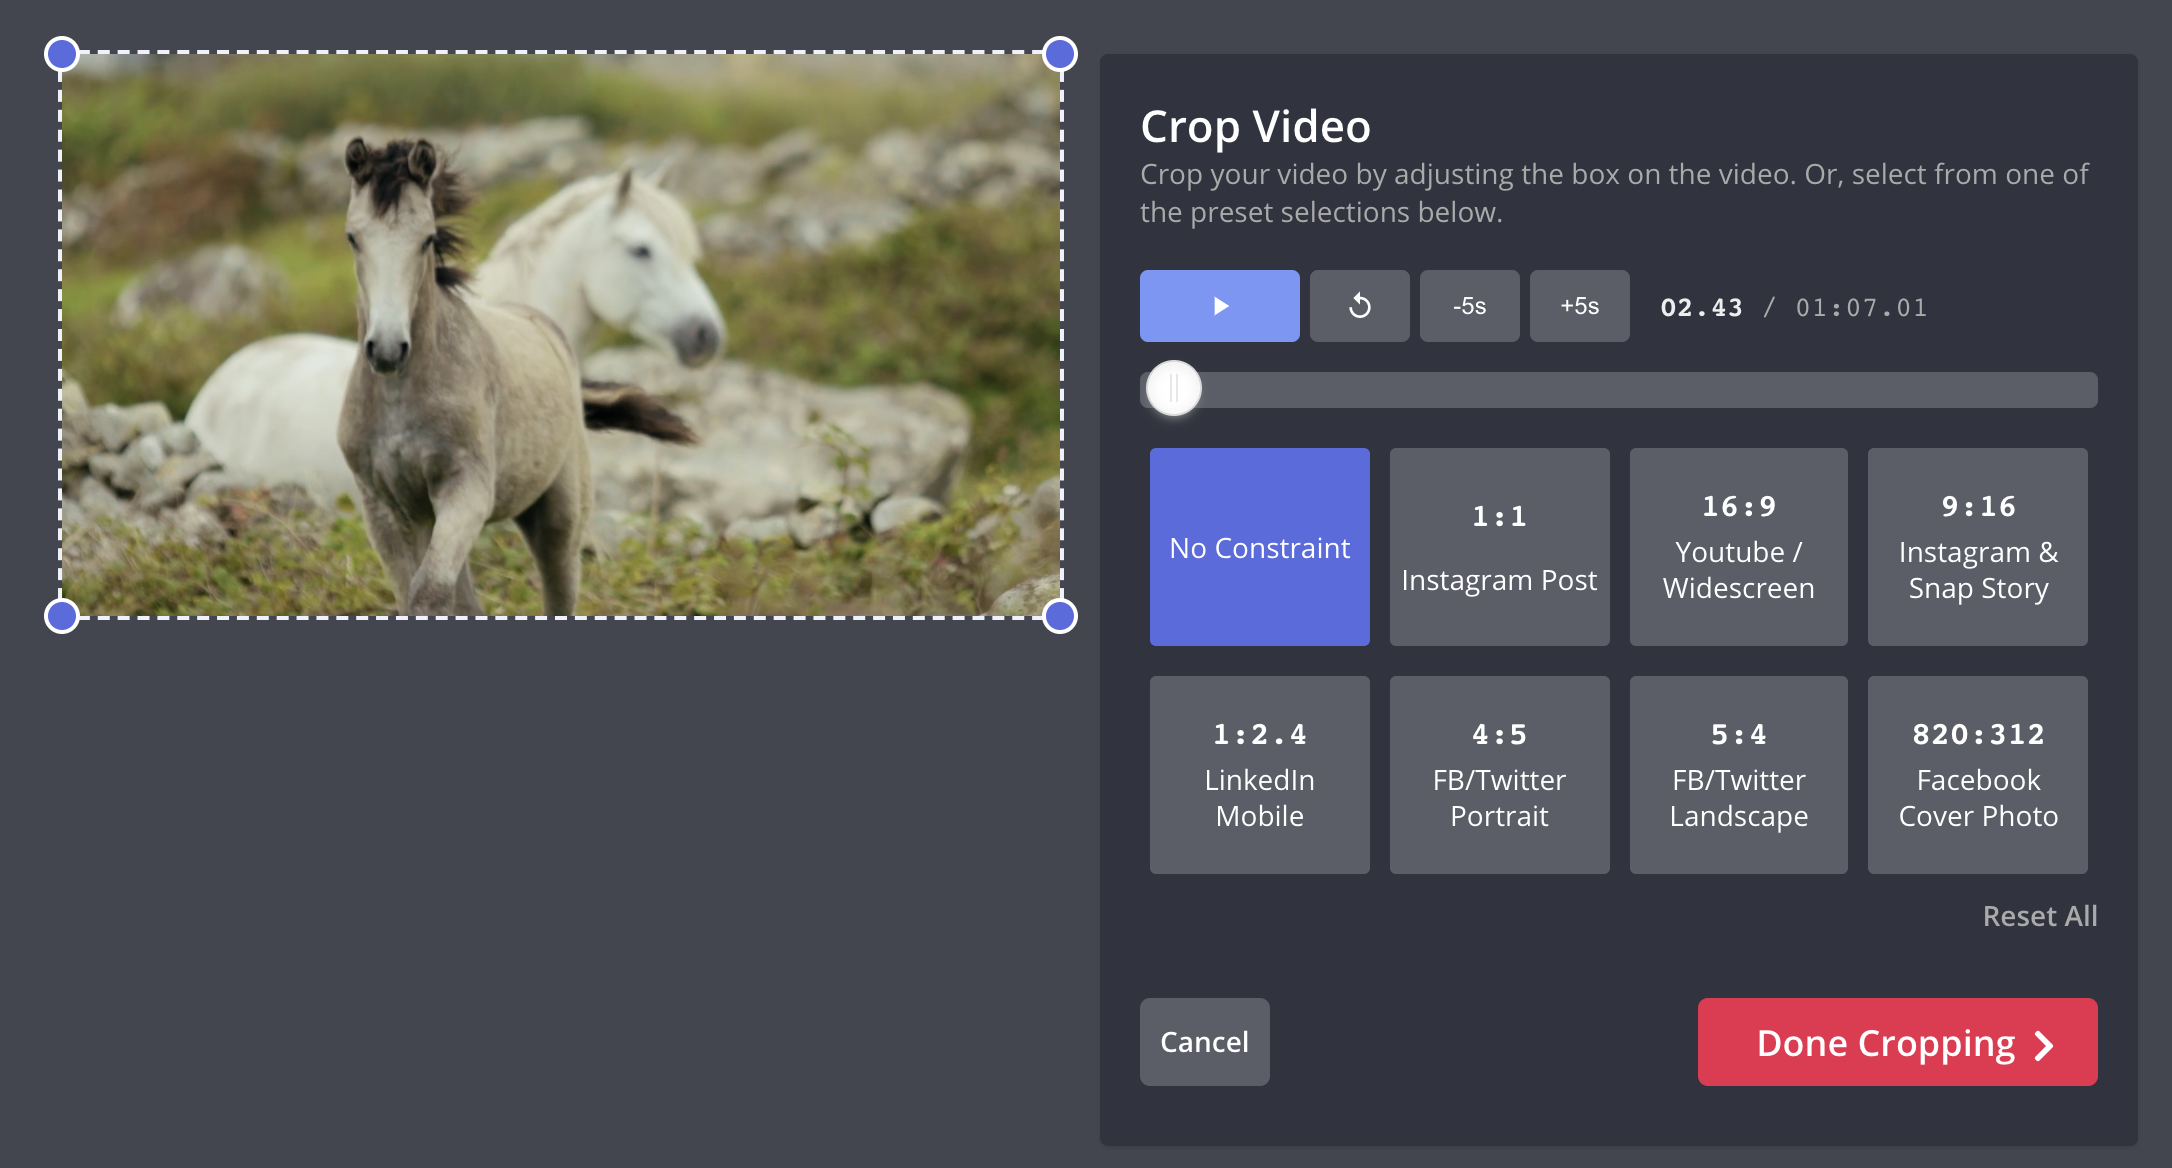 A screenshot of the Crop tool view that shows users playback controls to play and pause a video. The user can select different crops, such as Unconstrained which lets them freeform crop. The others are common presets like 1:1 for Instagram or 9:16 for Reels and TikTok. When done, the user can click the red "Done Cropping" button to save the changes.